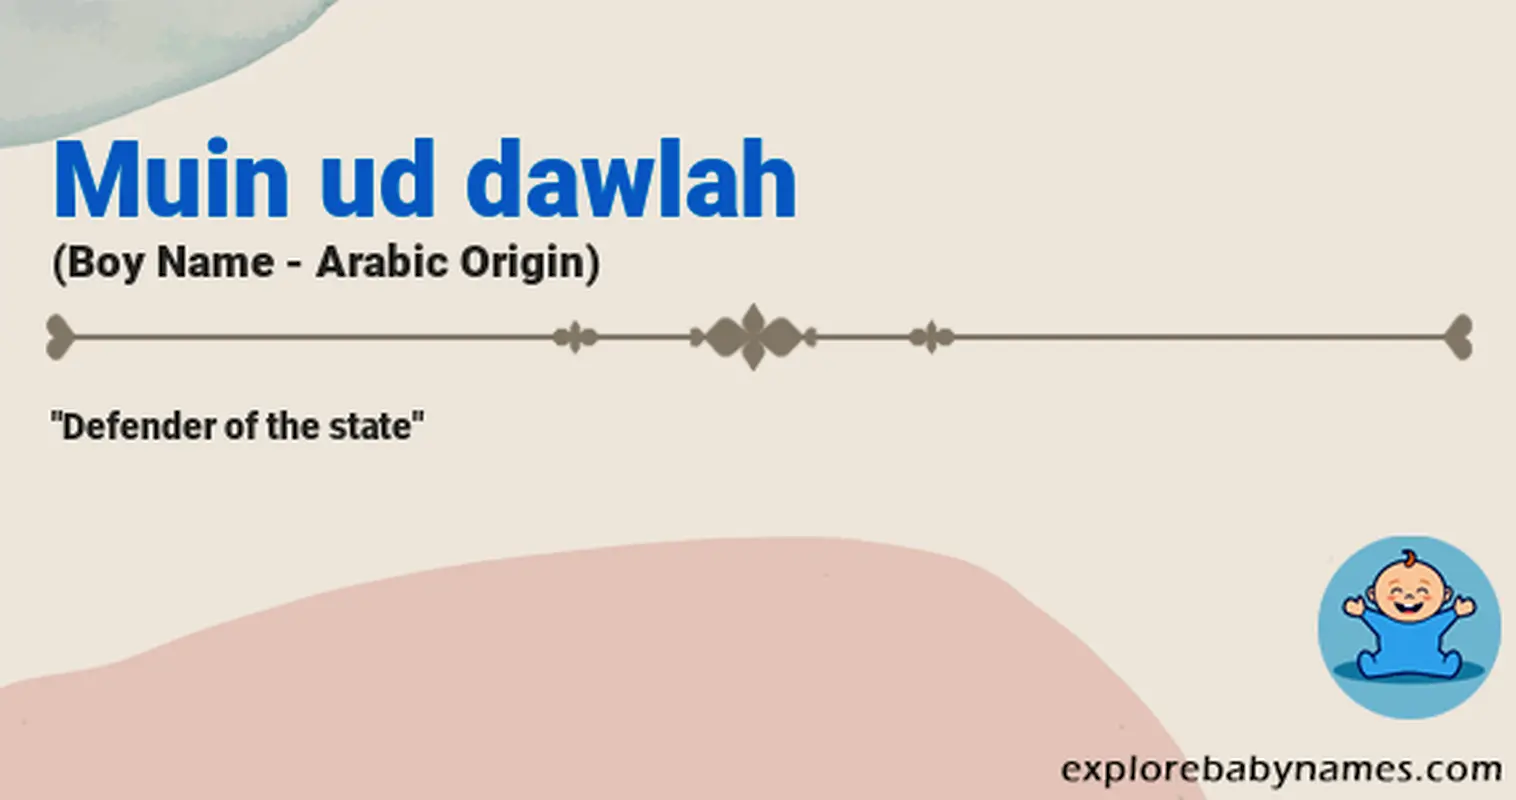 Meaning of Muin ud dawlah